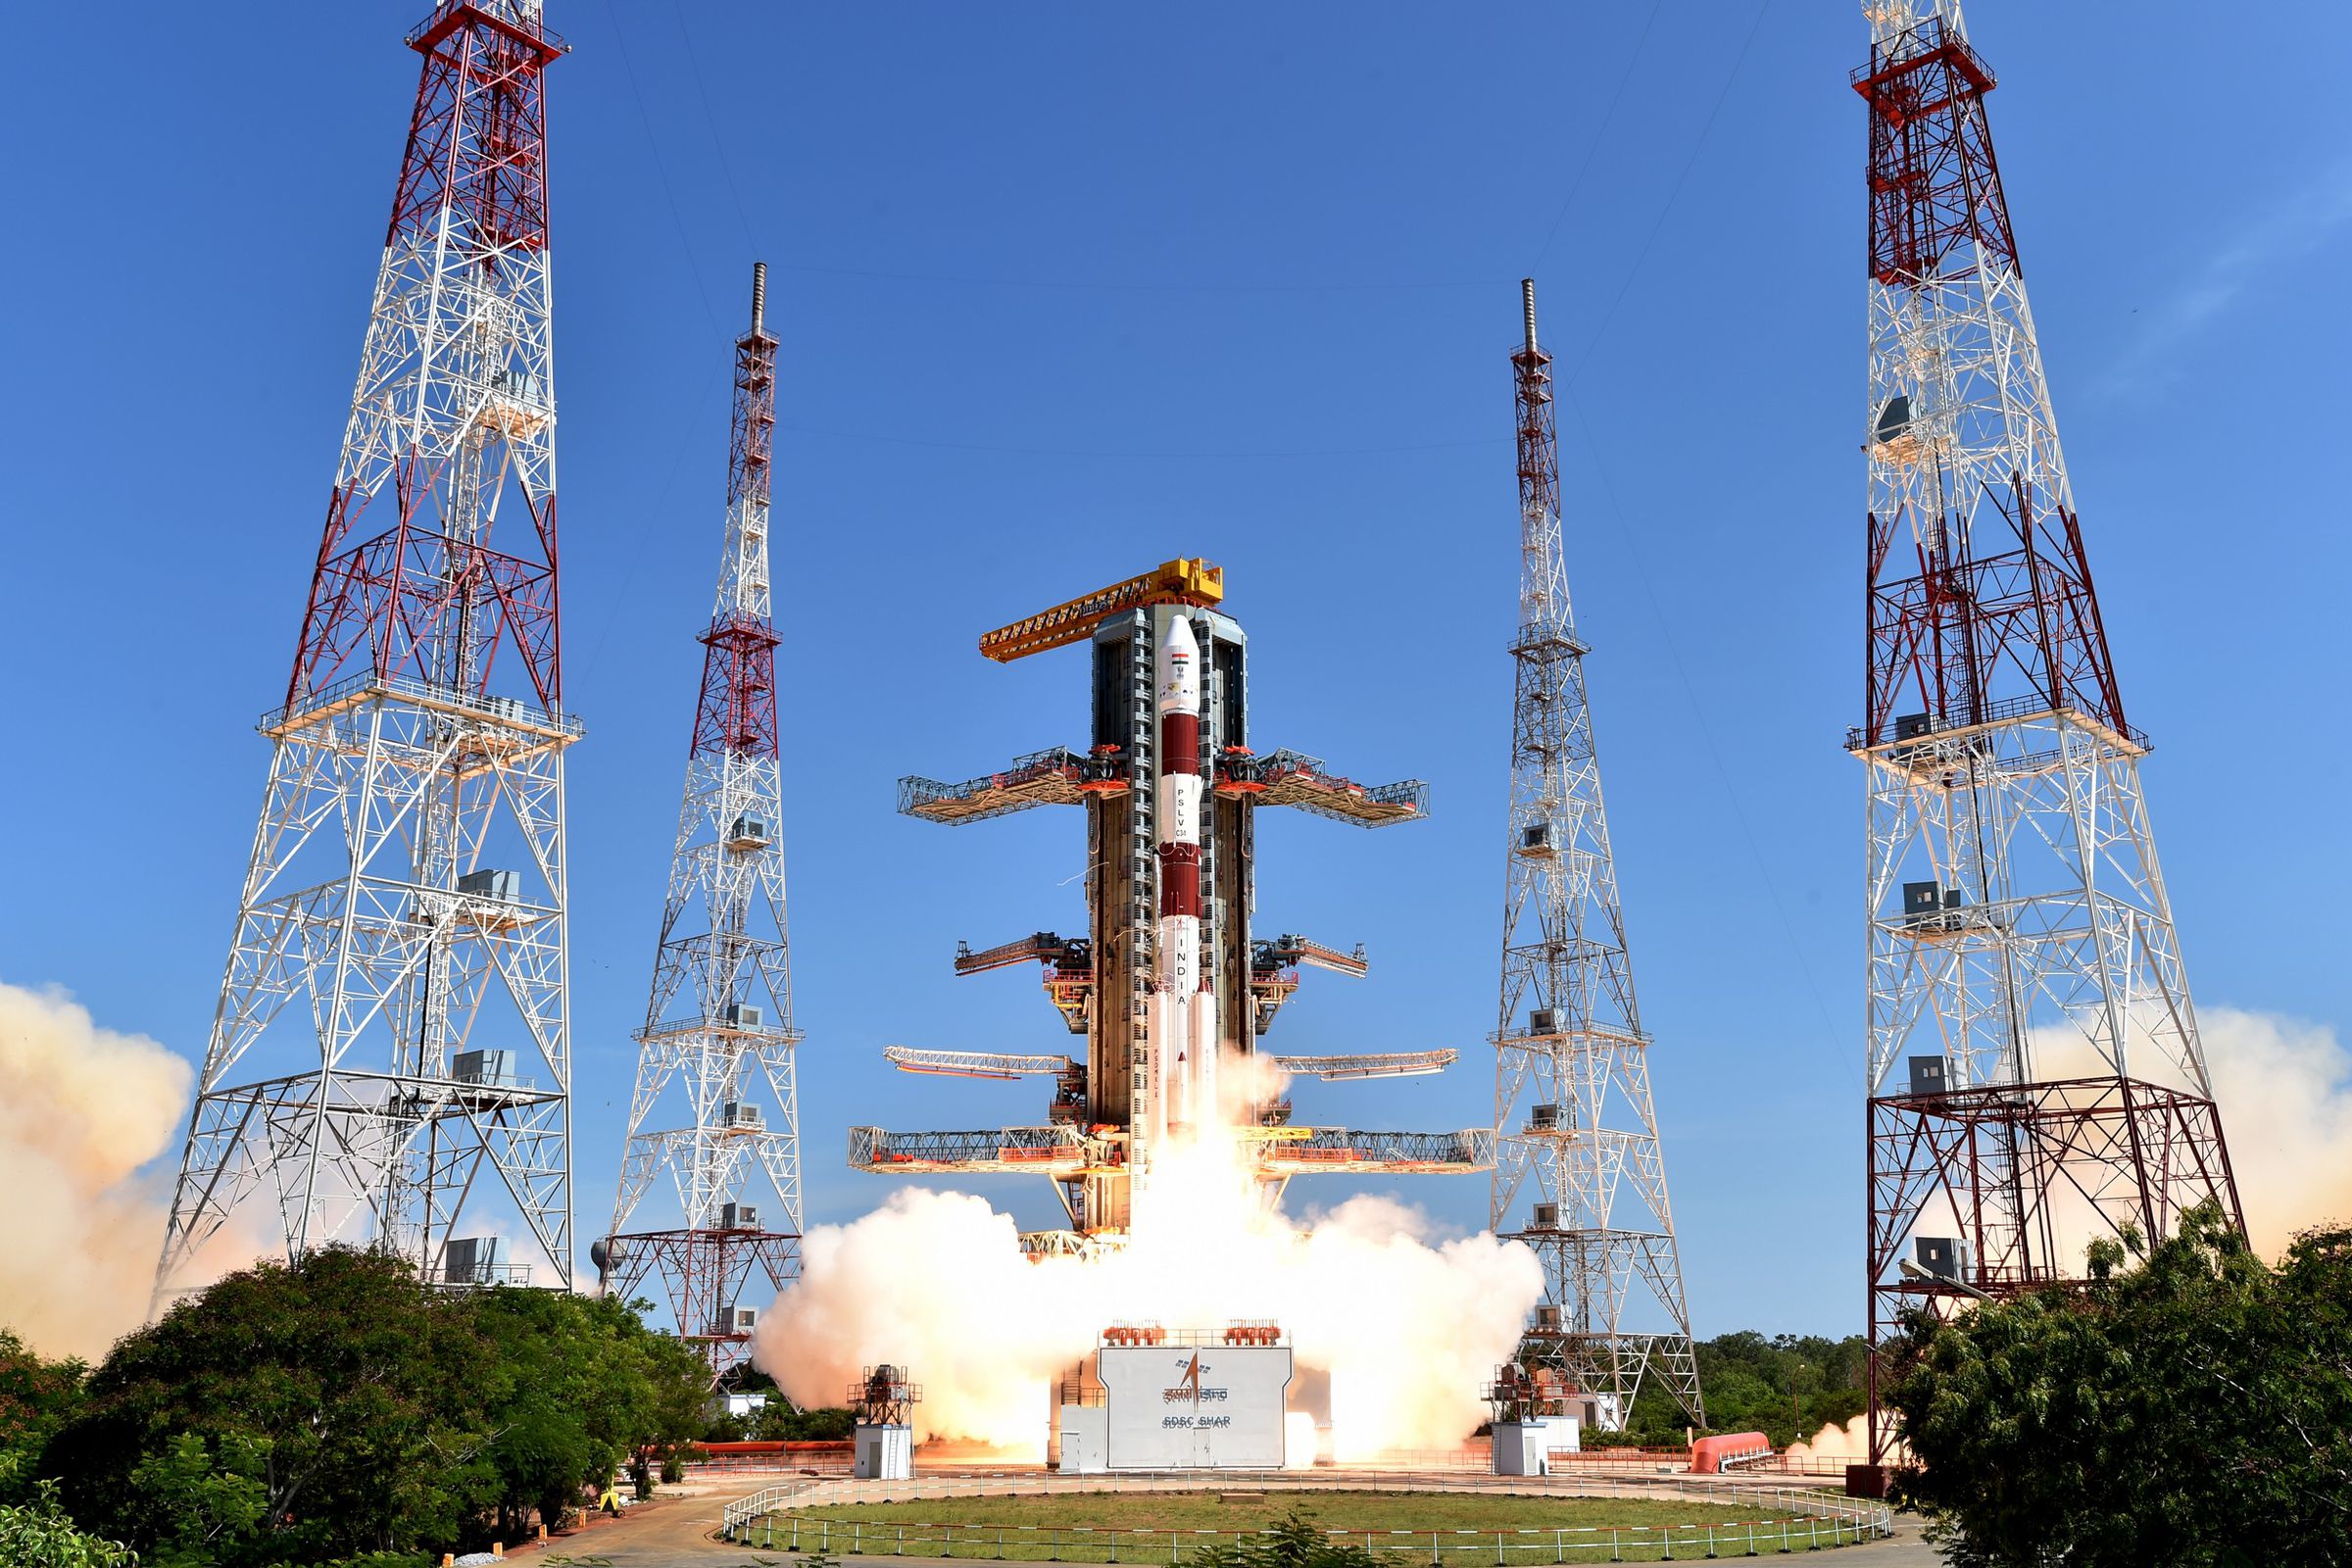 An Indian PSLV rocket, which was used to launch the Swarm satellites